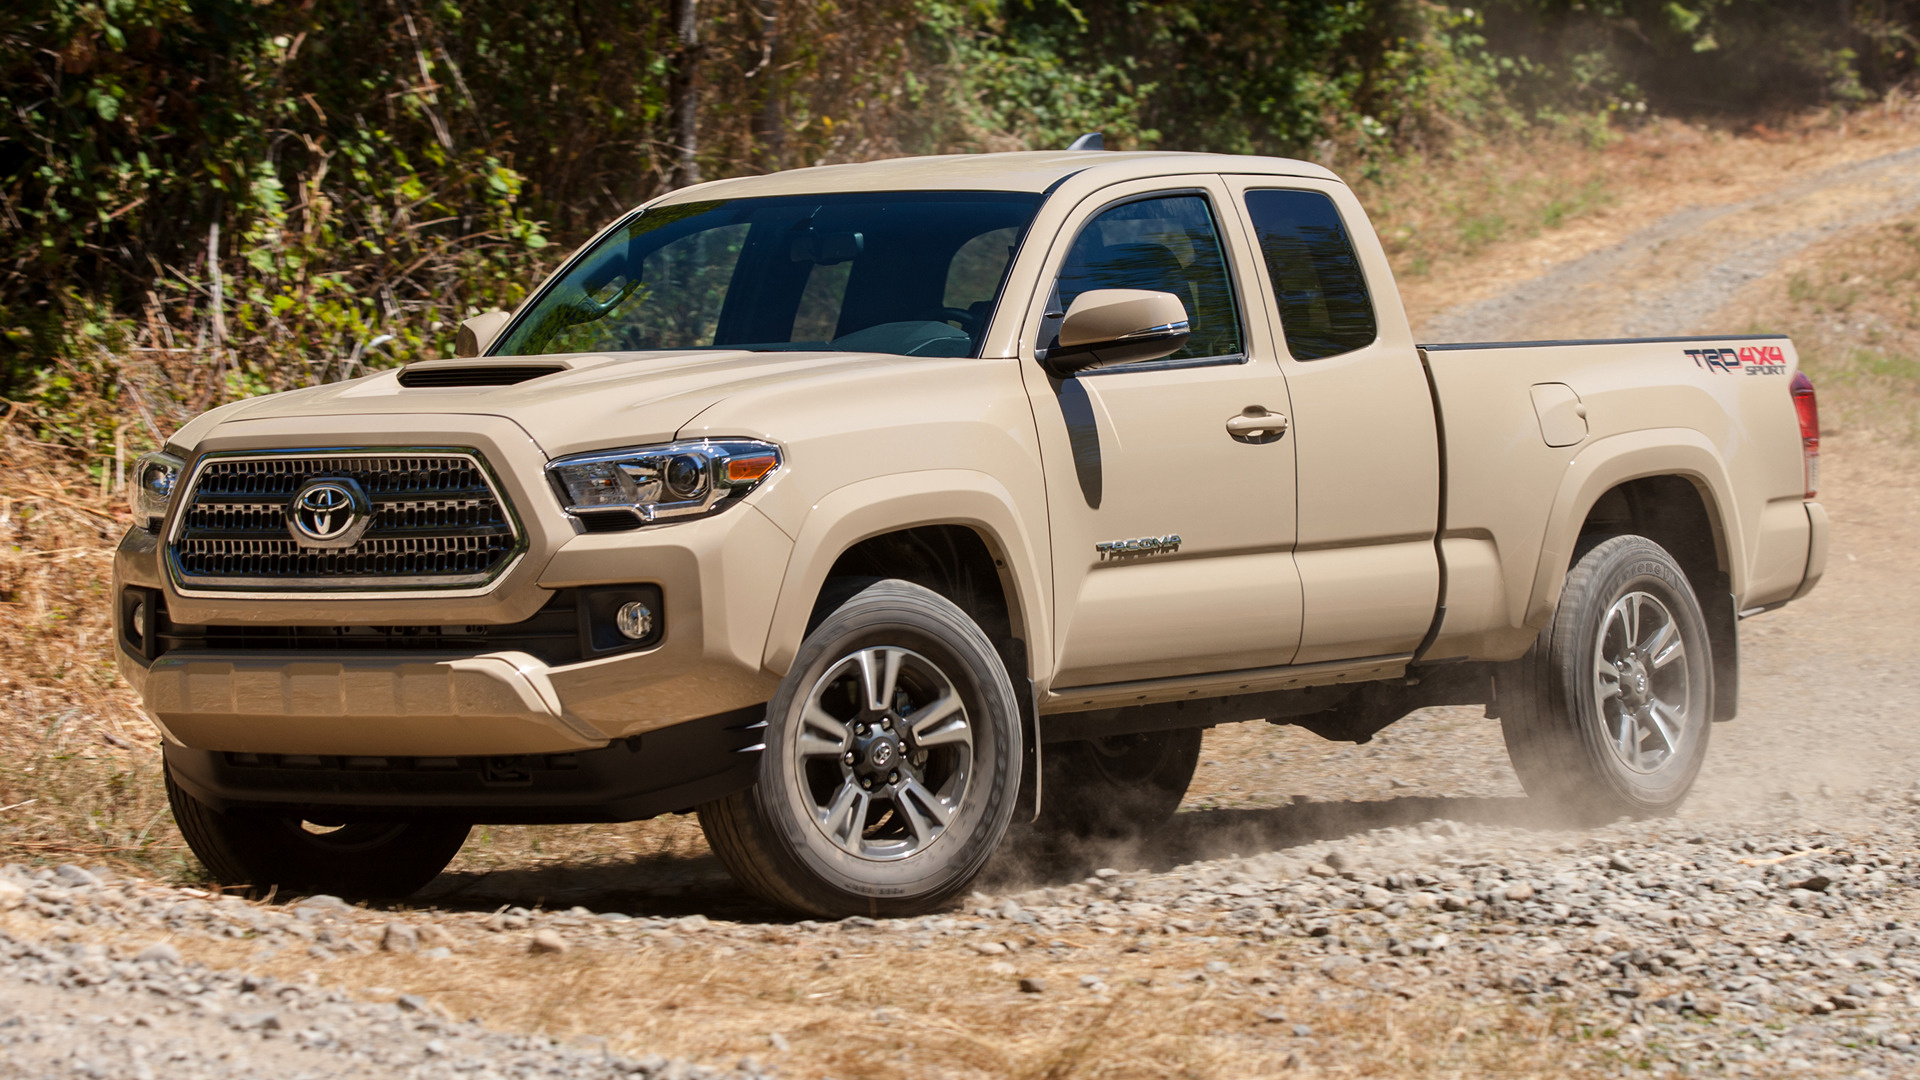 Toyota Tacoma Trd Sport Access Cab 2016 Wallpapers And Hd Images